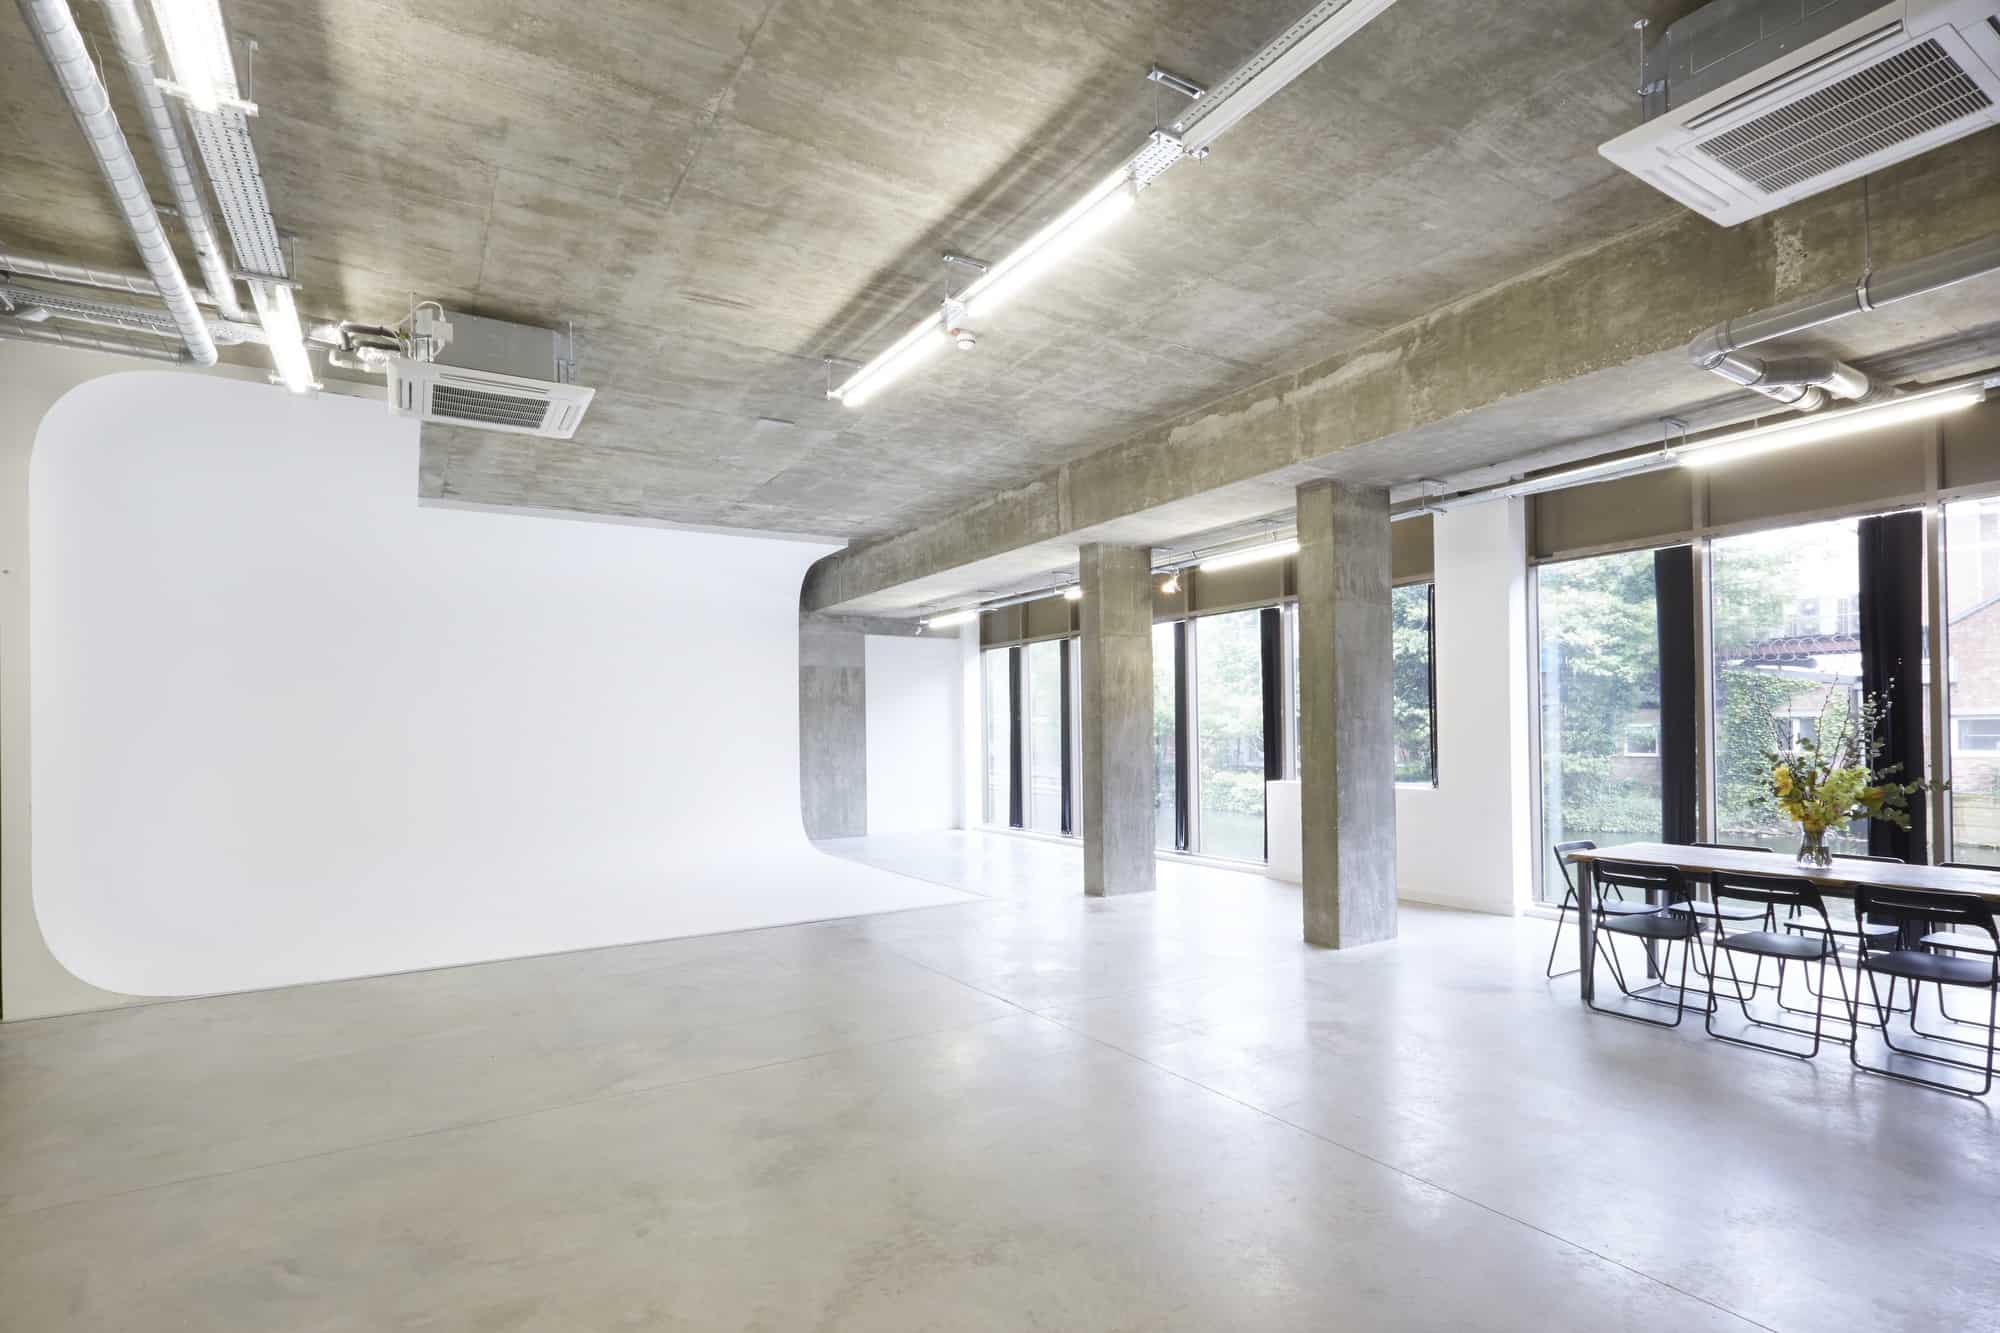 Haggerston One N1 - A sleek daylight studio with polished concrete floors. Available for commercial photography and filming hires, and events - The Location Guys